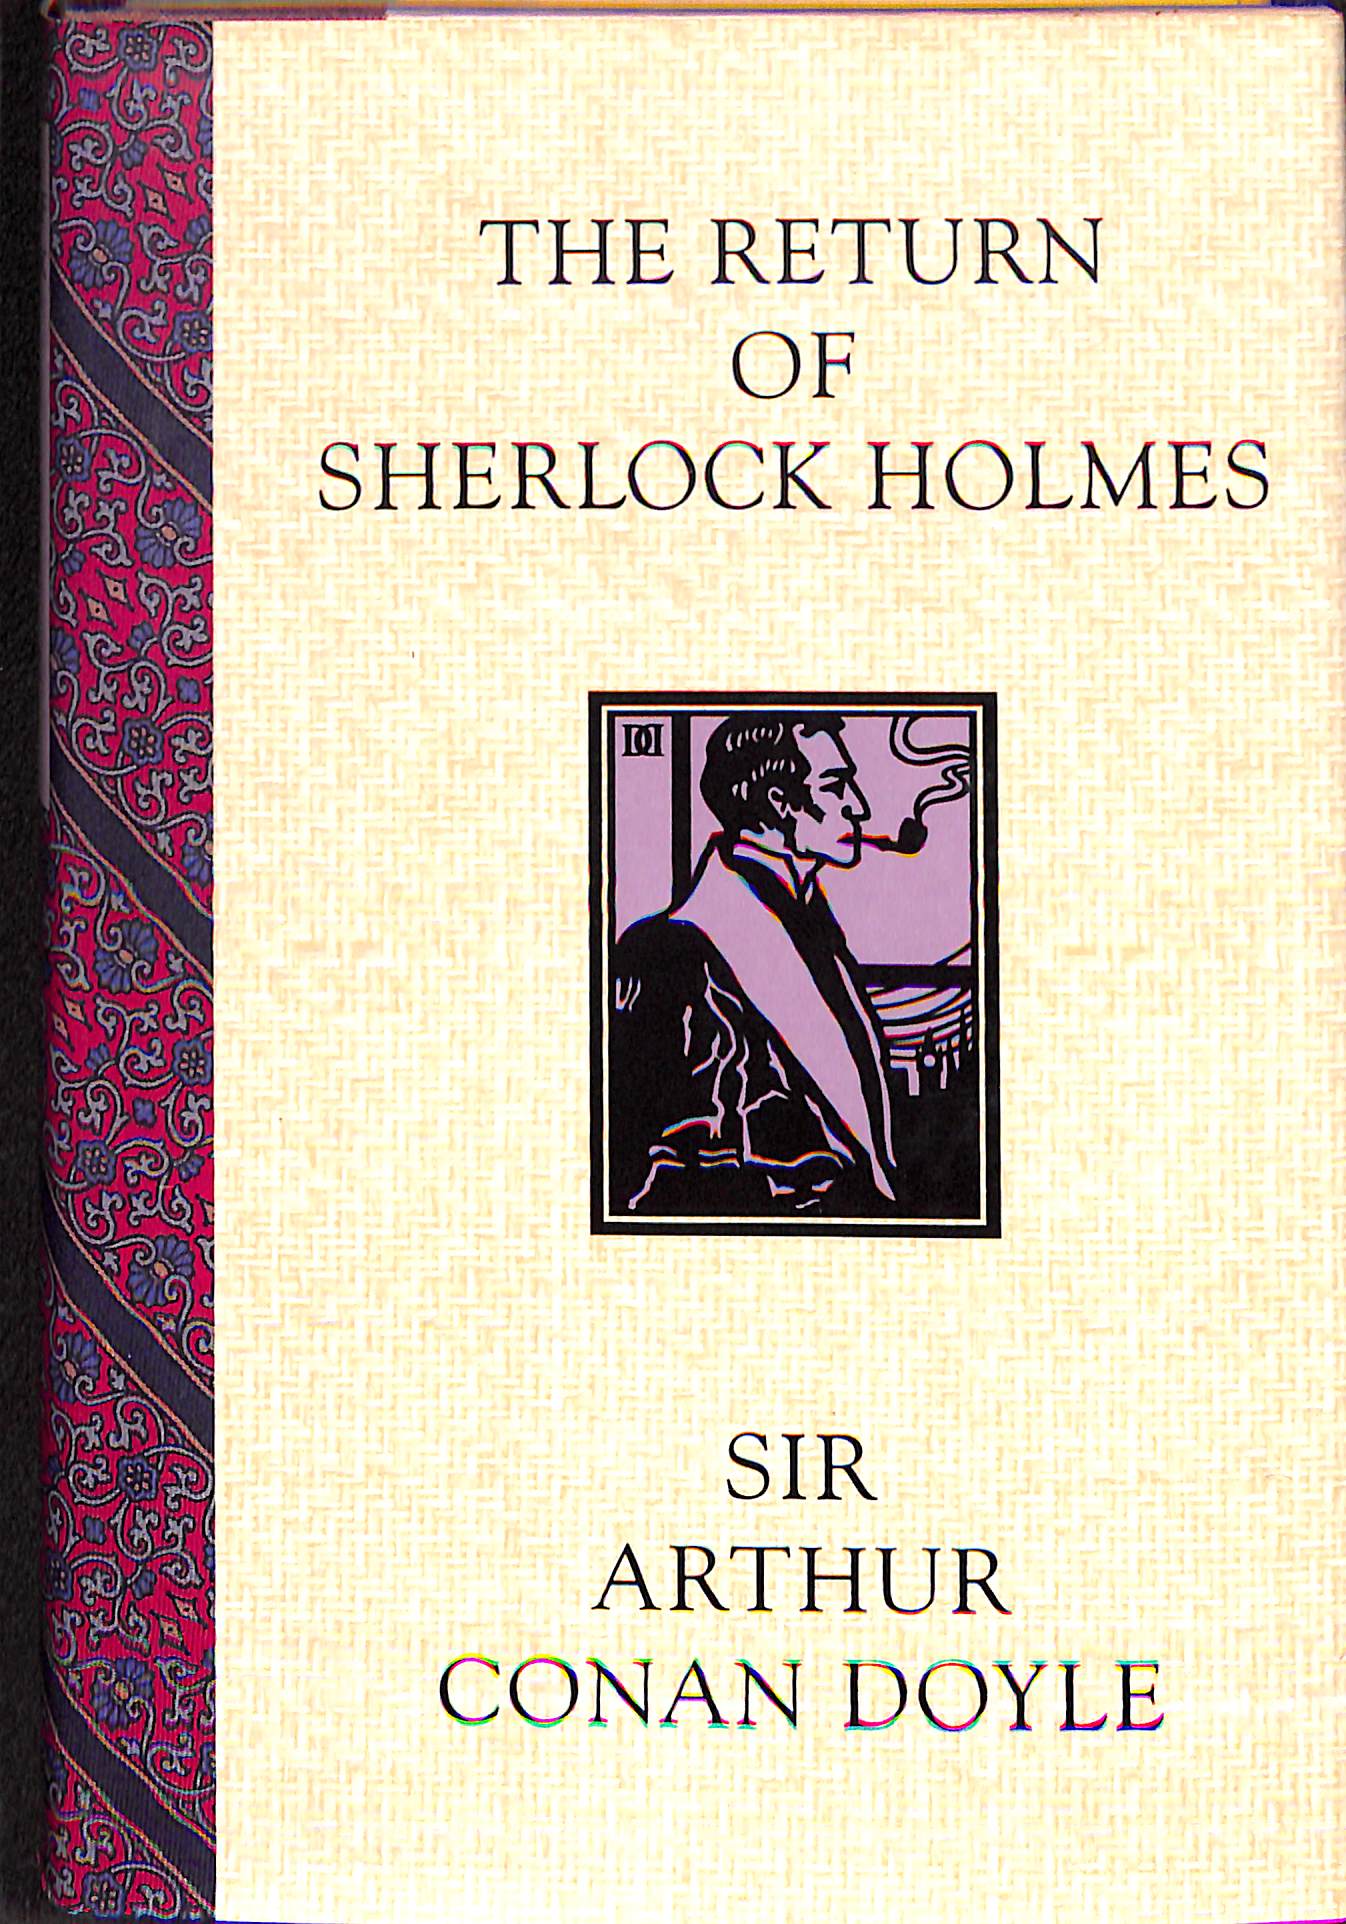 the case book of sherlock holmes book